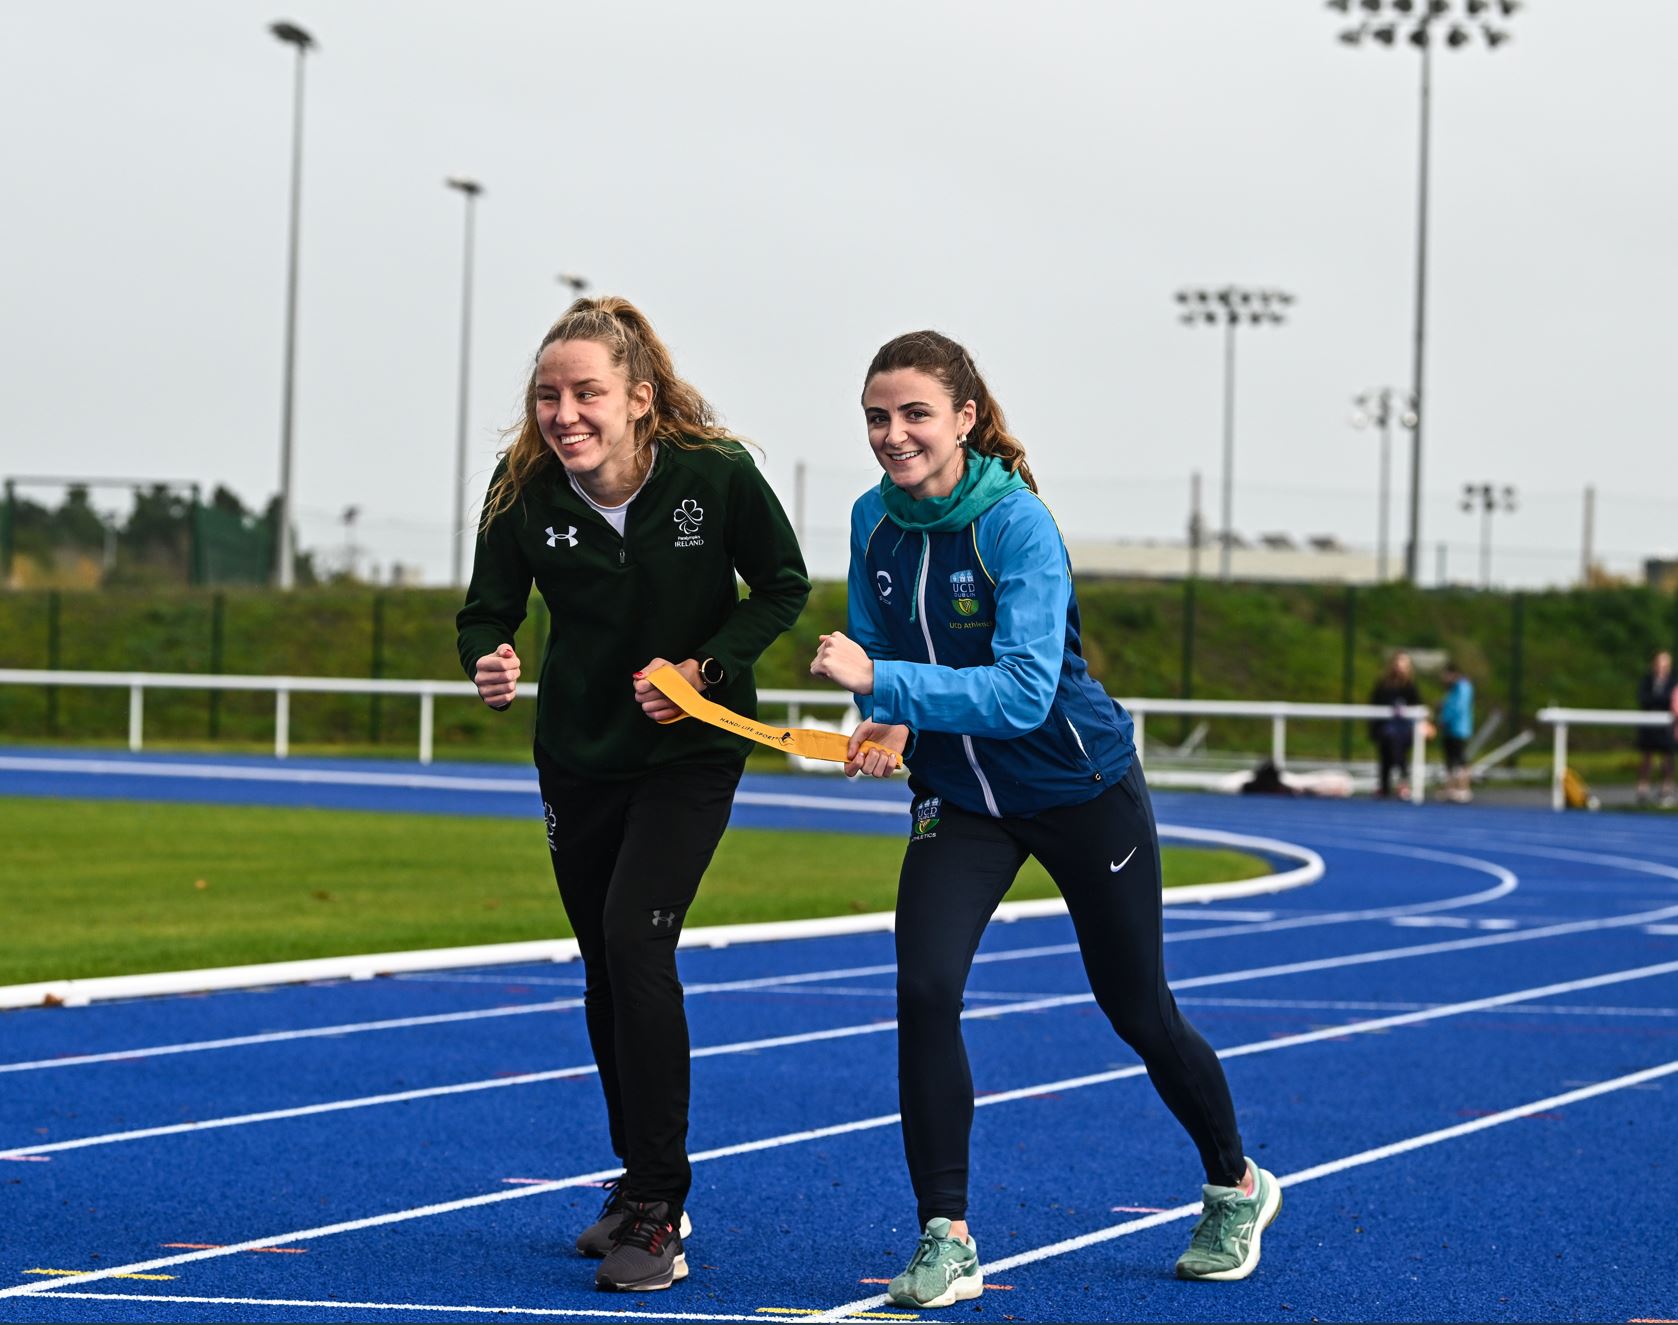 two females hold a tether and run on a running track